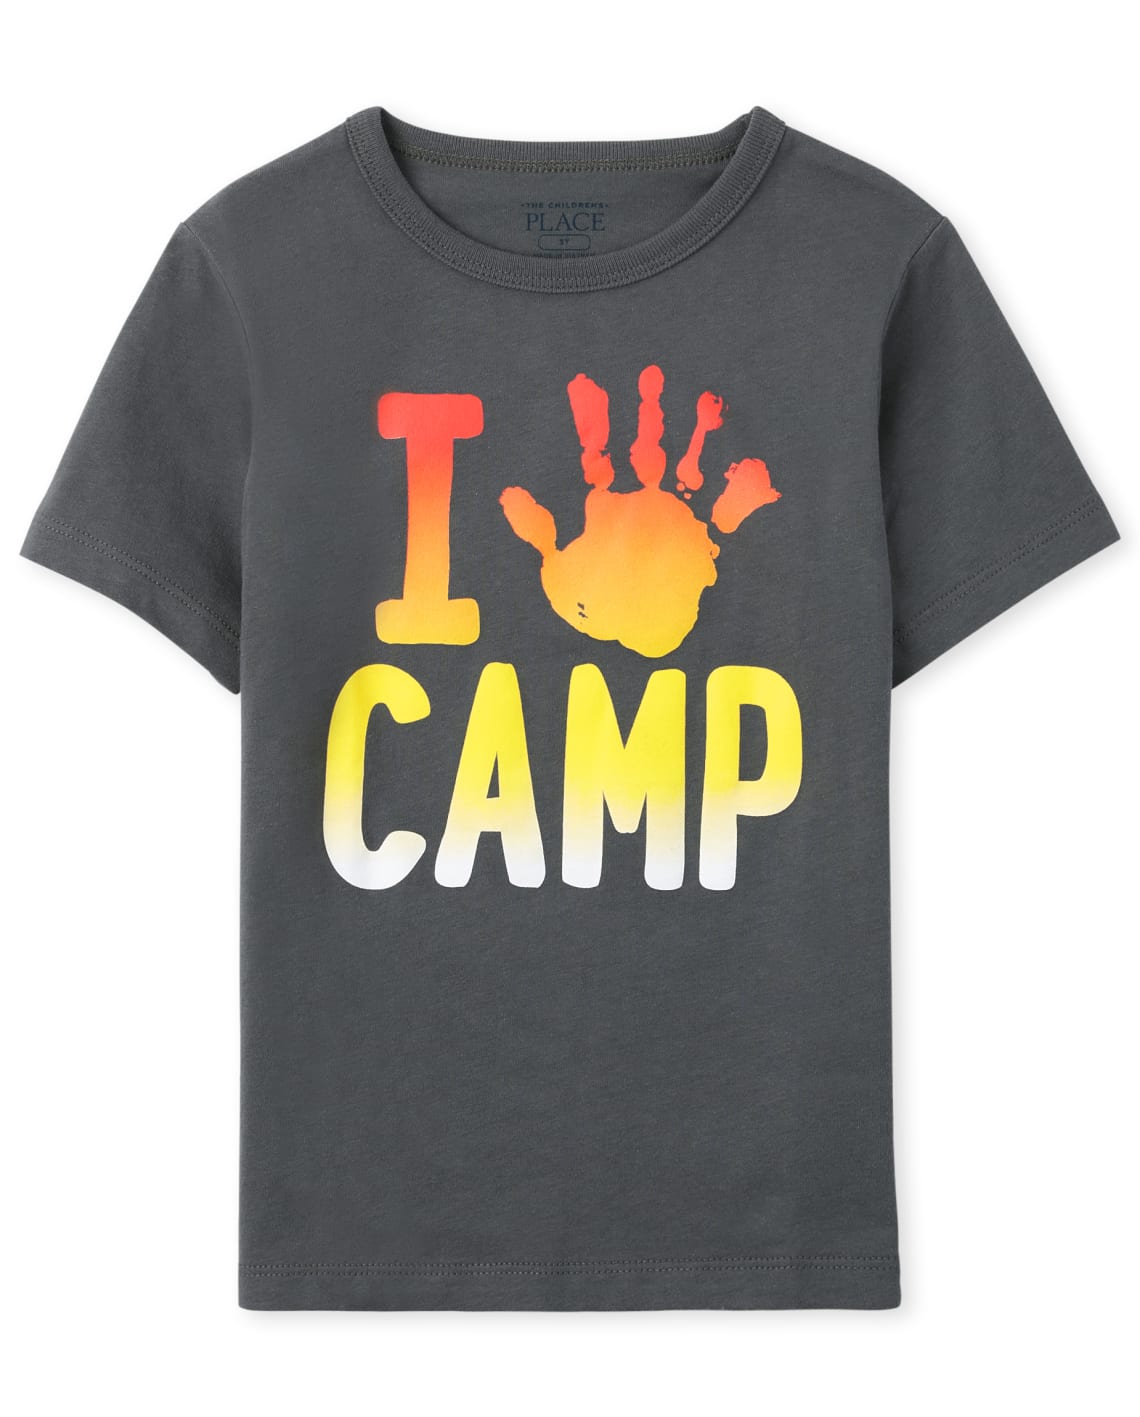 The Children's Place Toddler Boys Camp Graphic Tee (Size: 3T/4T in Black Ice)